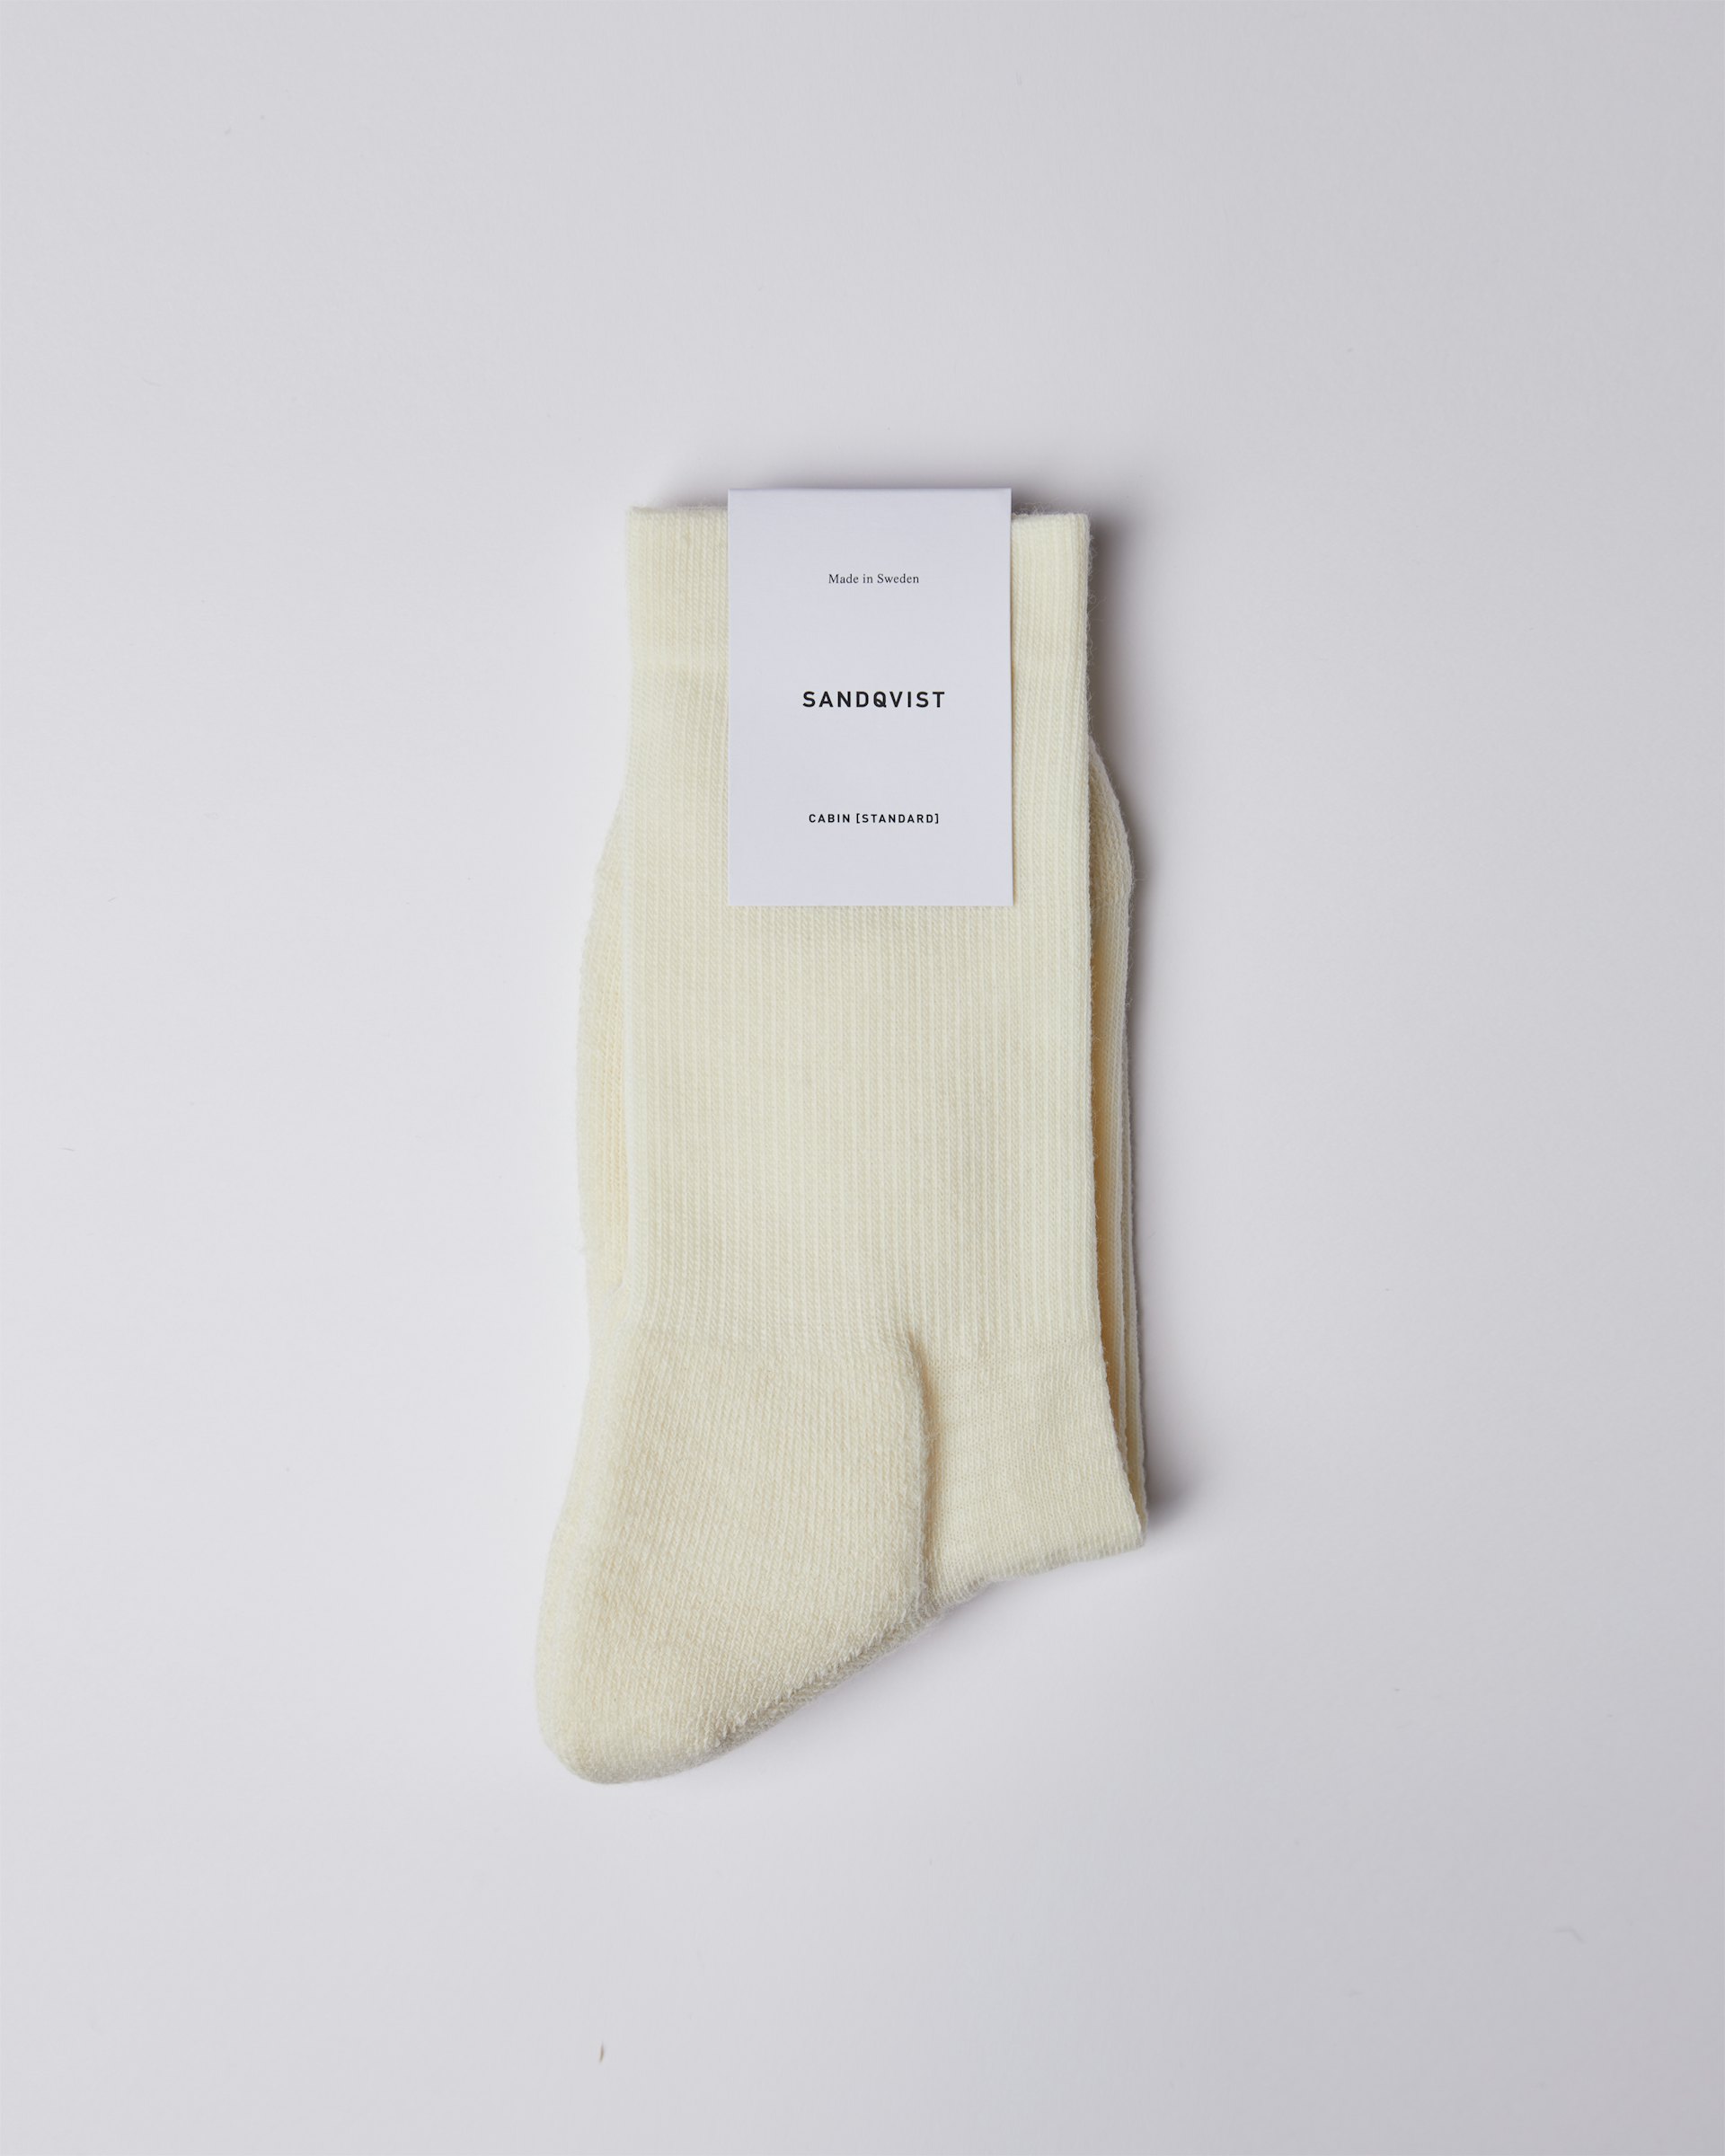 Wool sock belongs to the category Items and is in color off white (1 of 3)